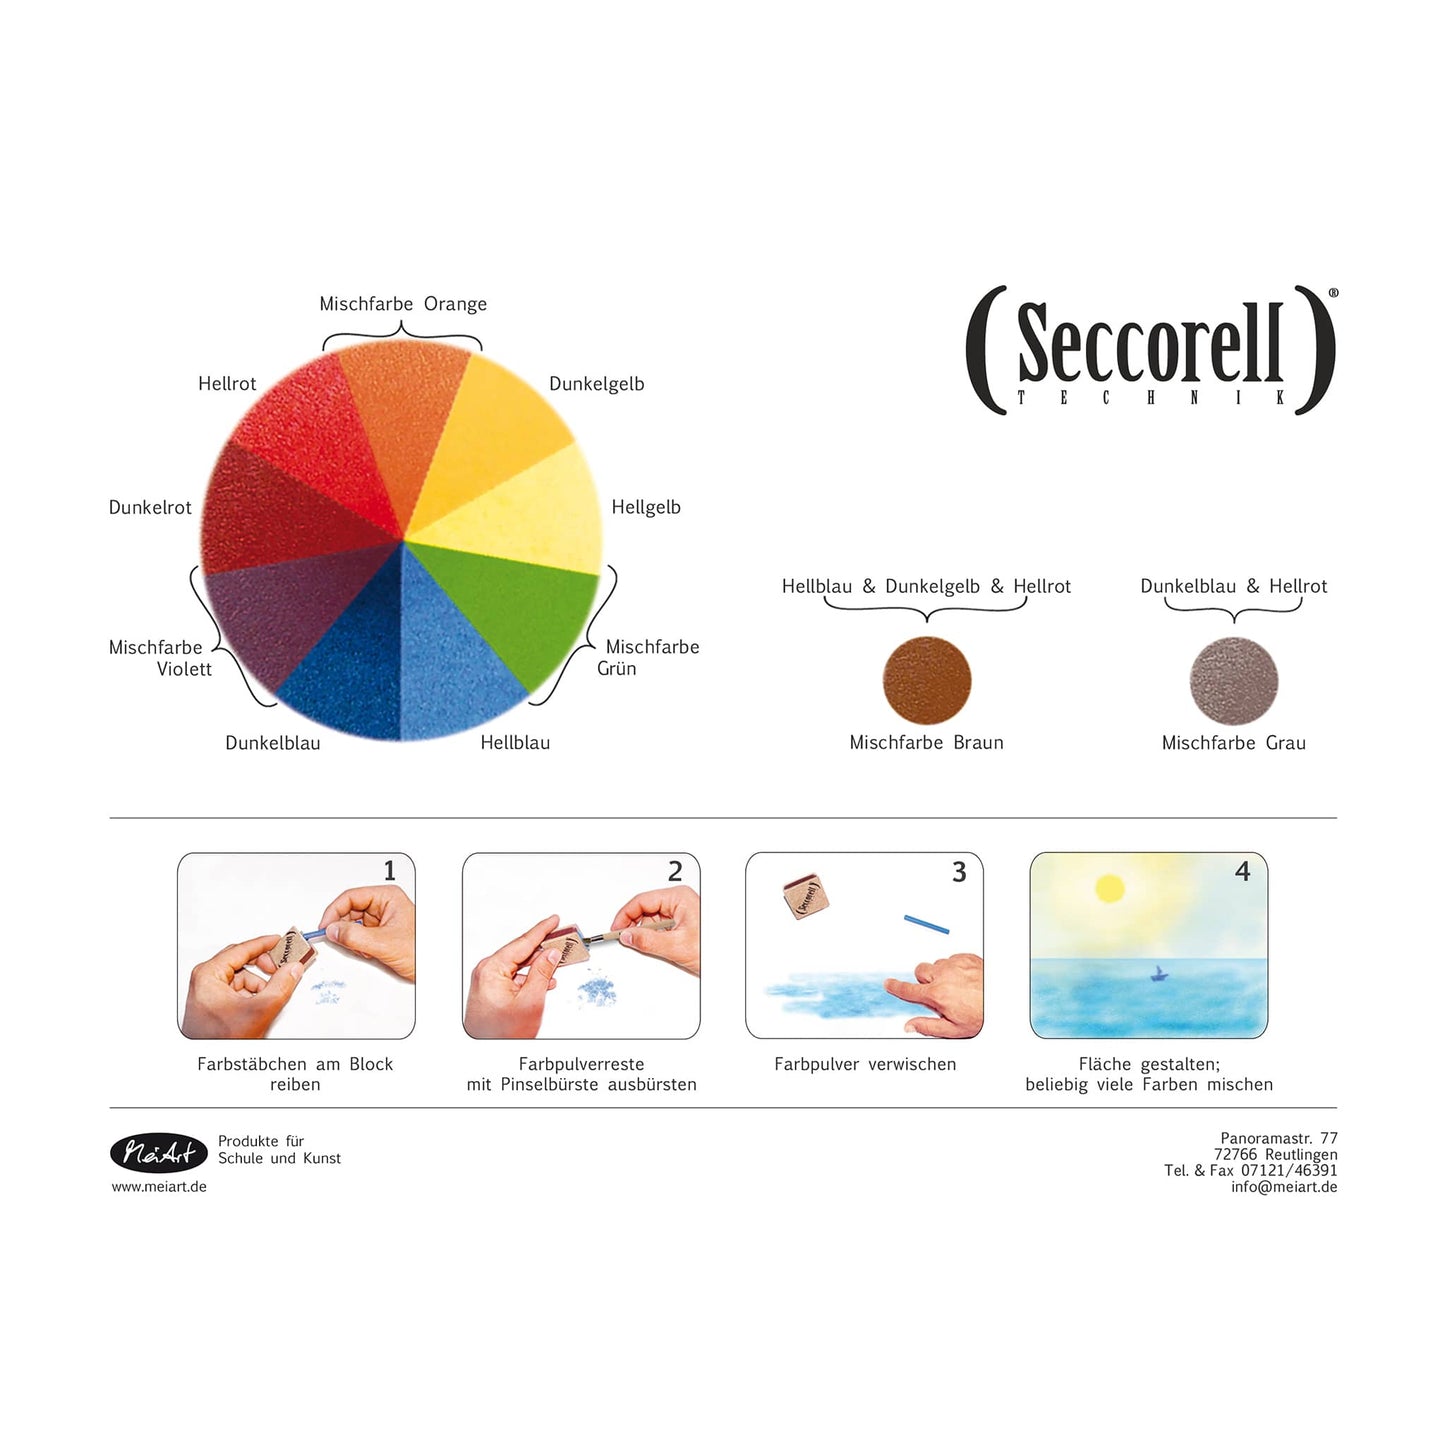 Seccorell color mixing card, laminated: Visualizes colour mixtures for creative design. Ideal for harmonious color transitions.